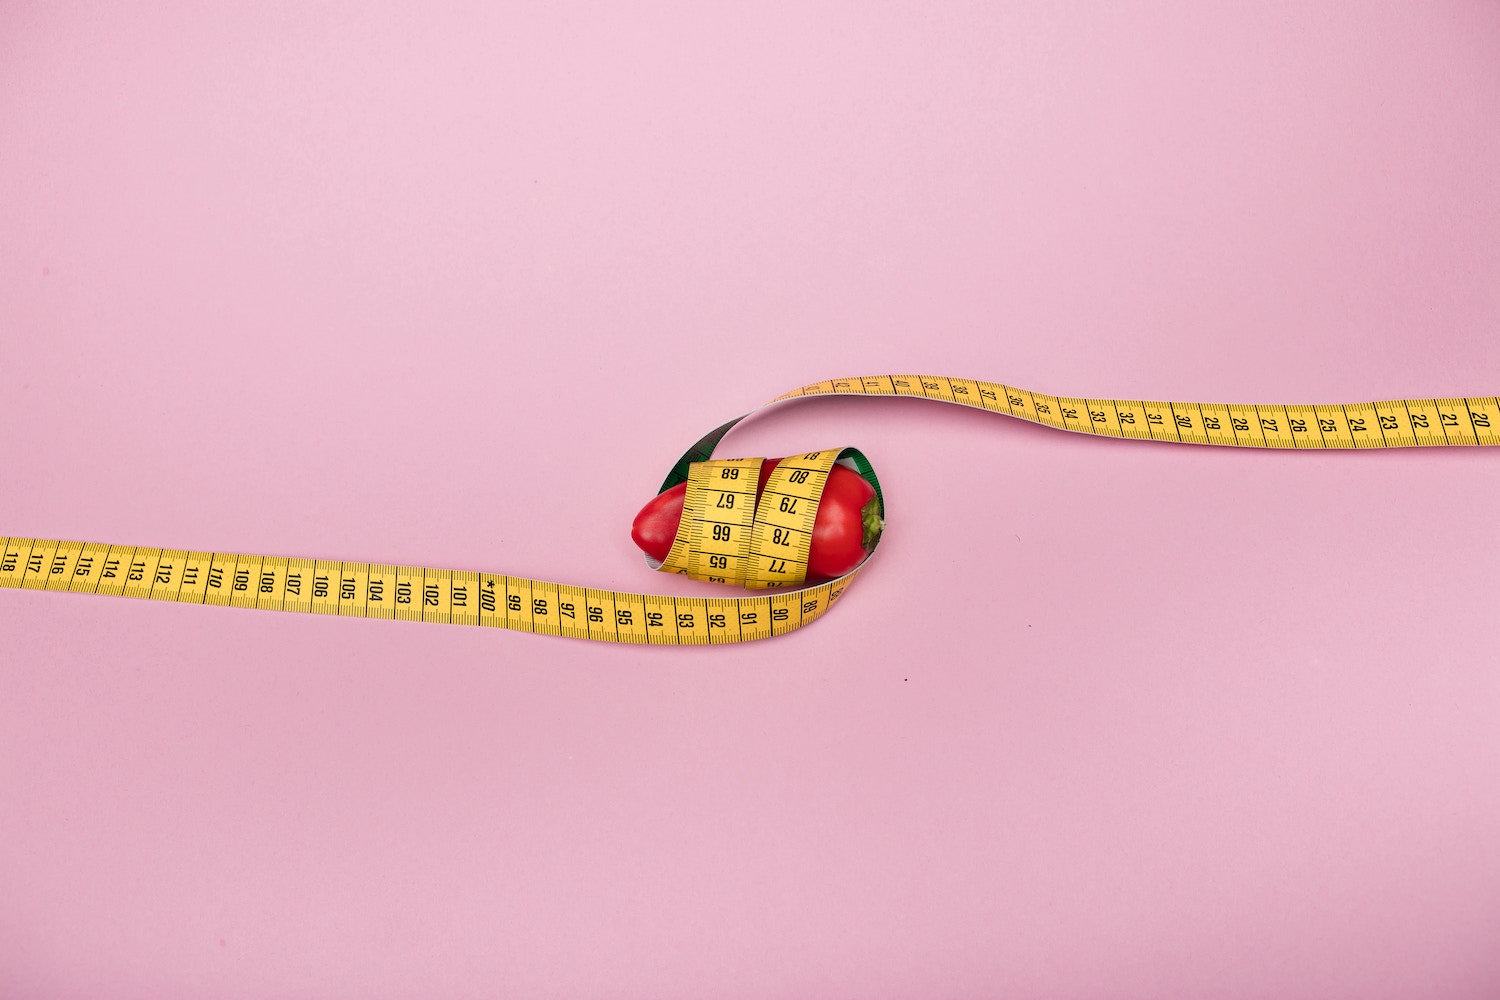 photo of hot pepper wrapped with measuring tape to portray small penis size